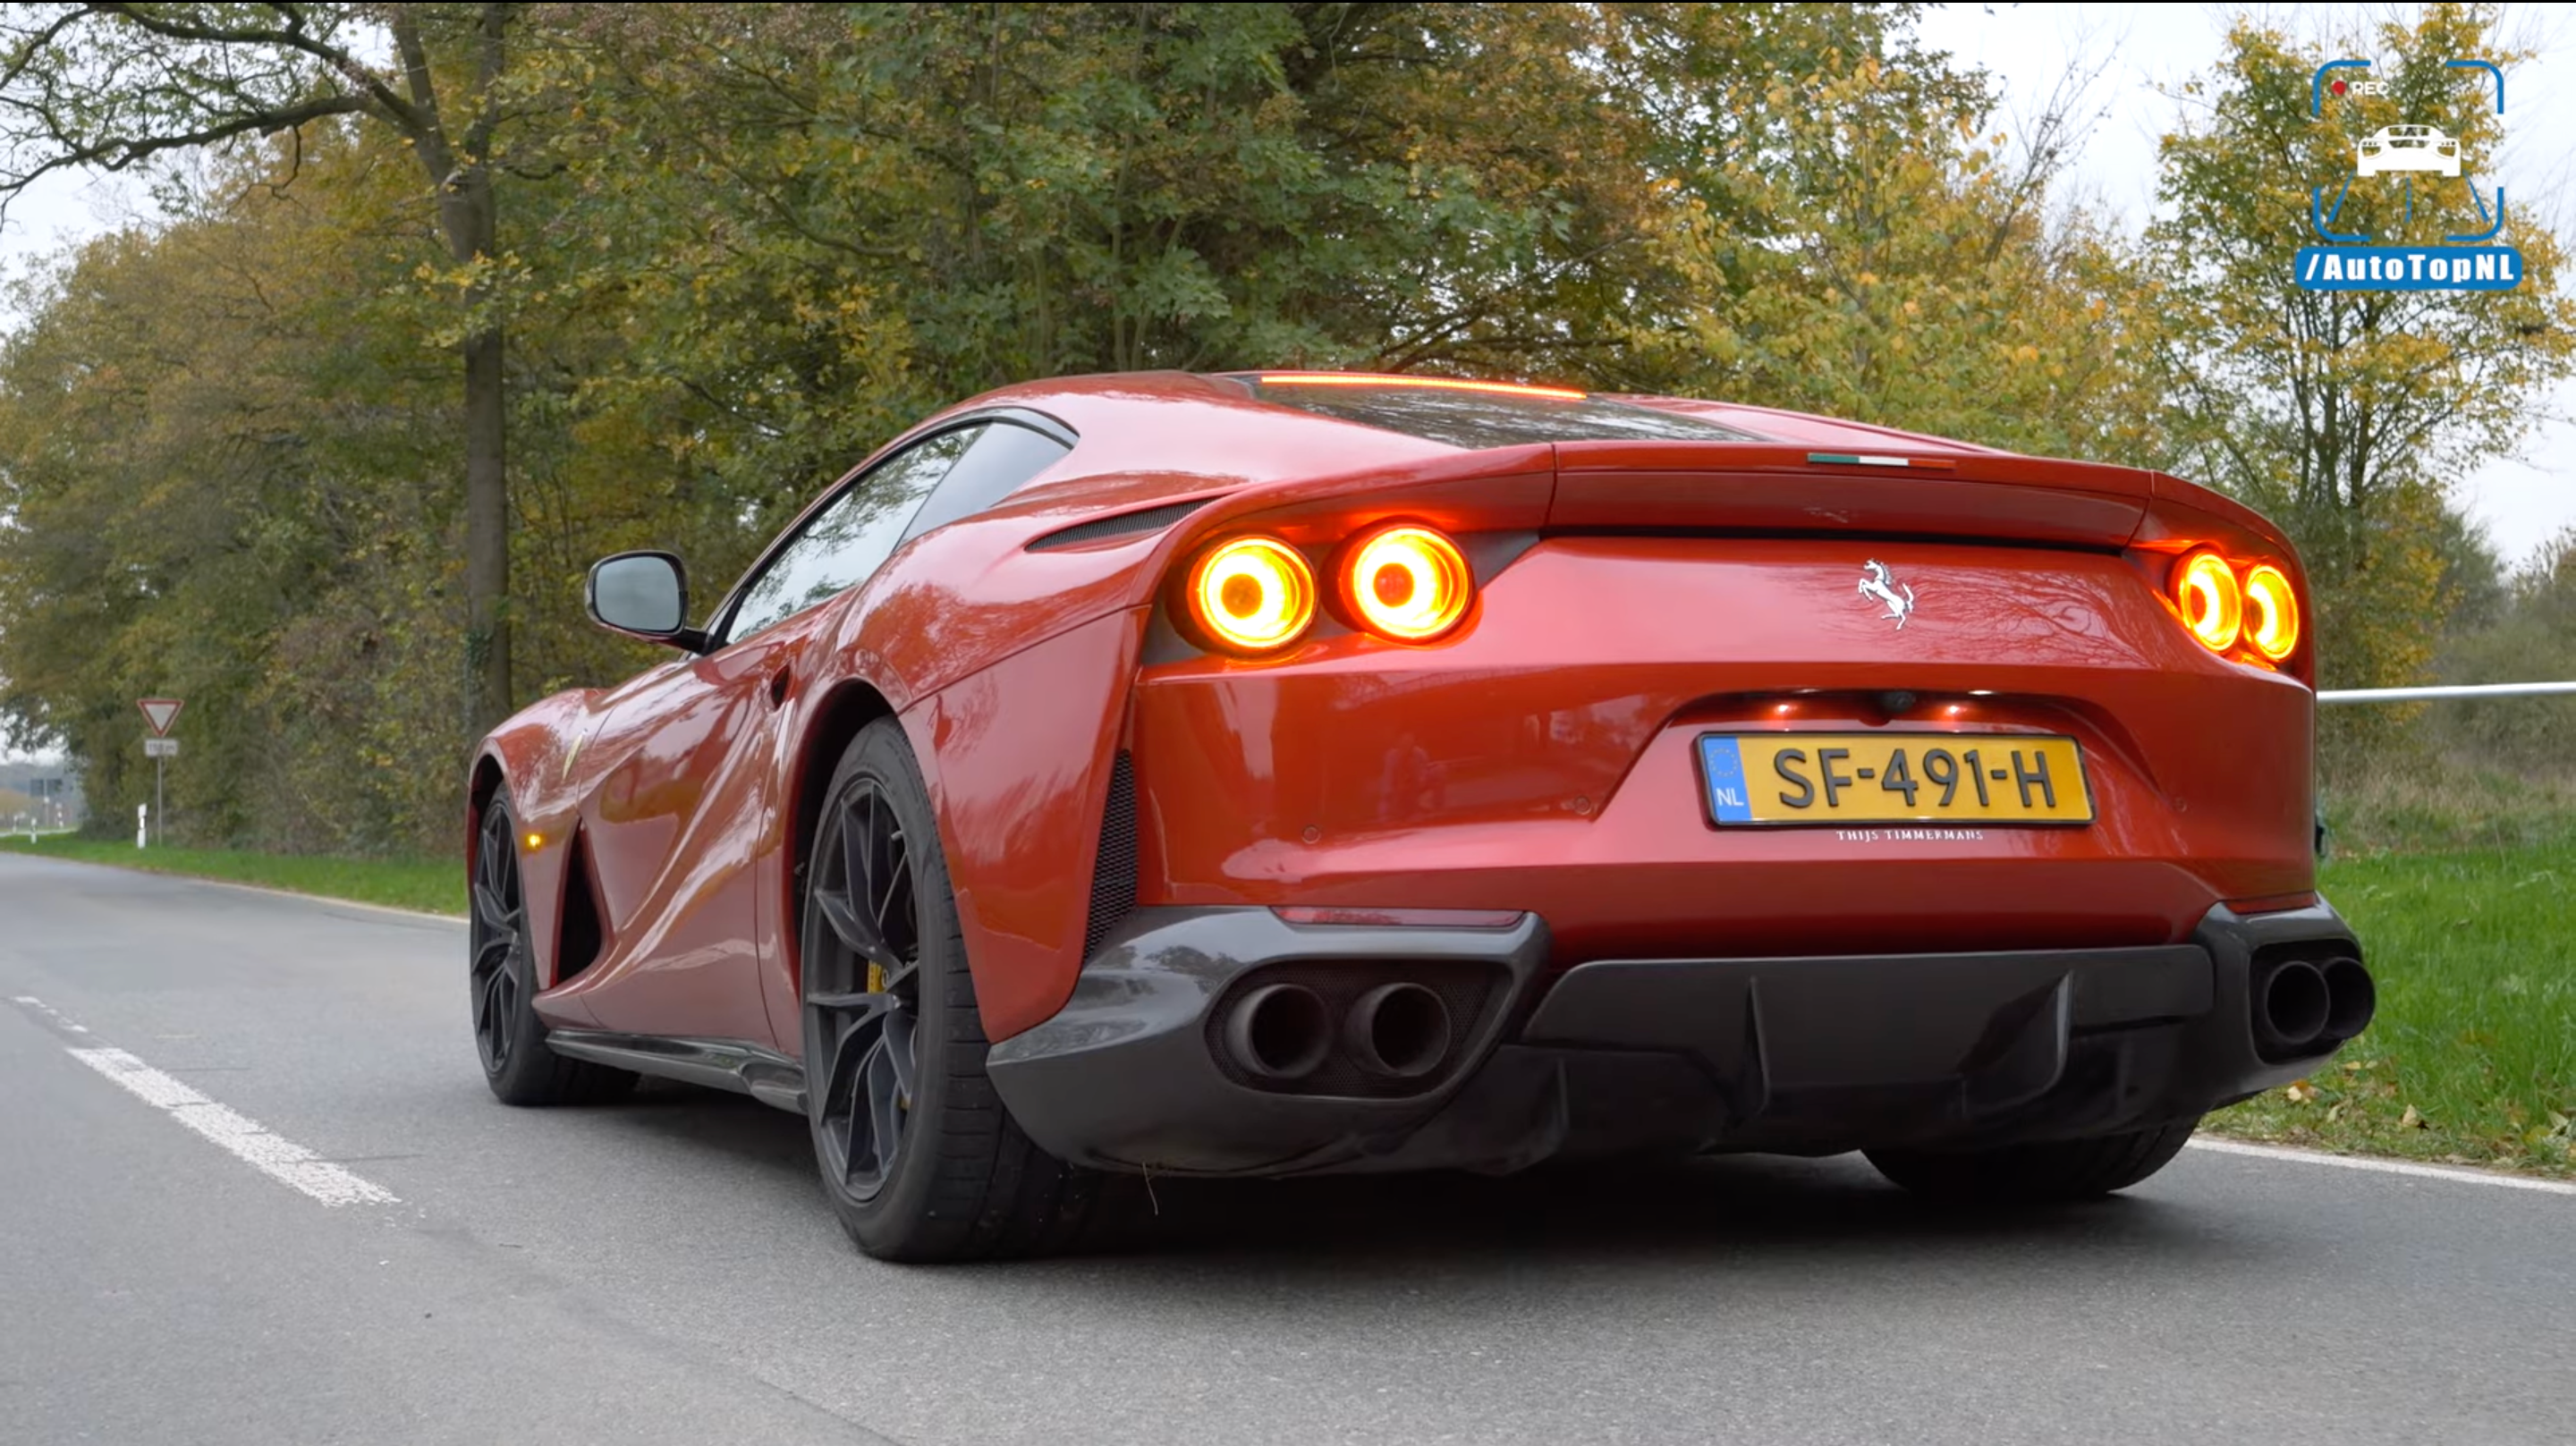 Rear end of a Ferrari 812 Superfast with Novitec exhaust